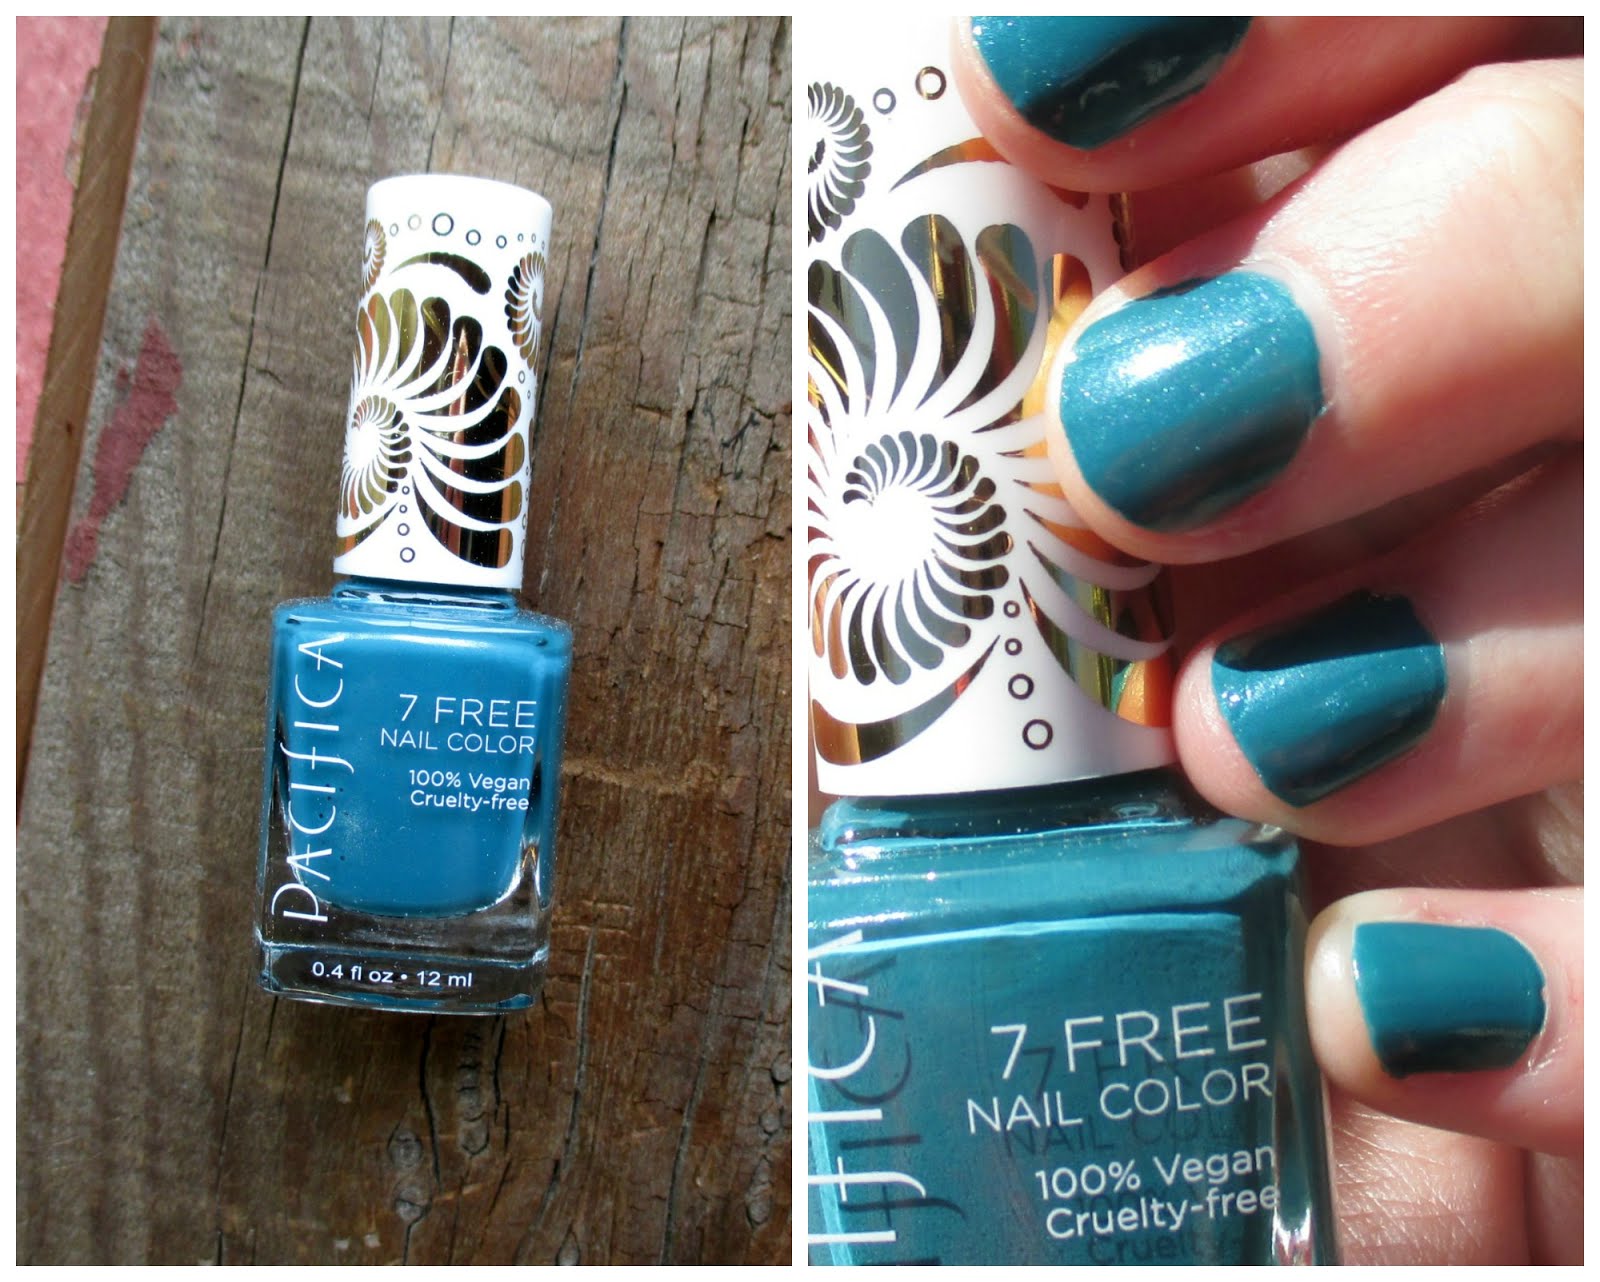 1. Pacifica 7 Free Nail Color in Pale Blue Eyes - wide 7